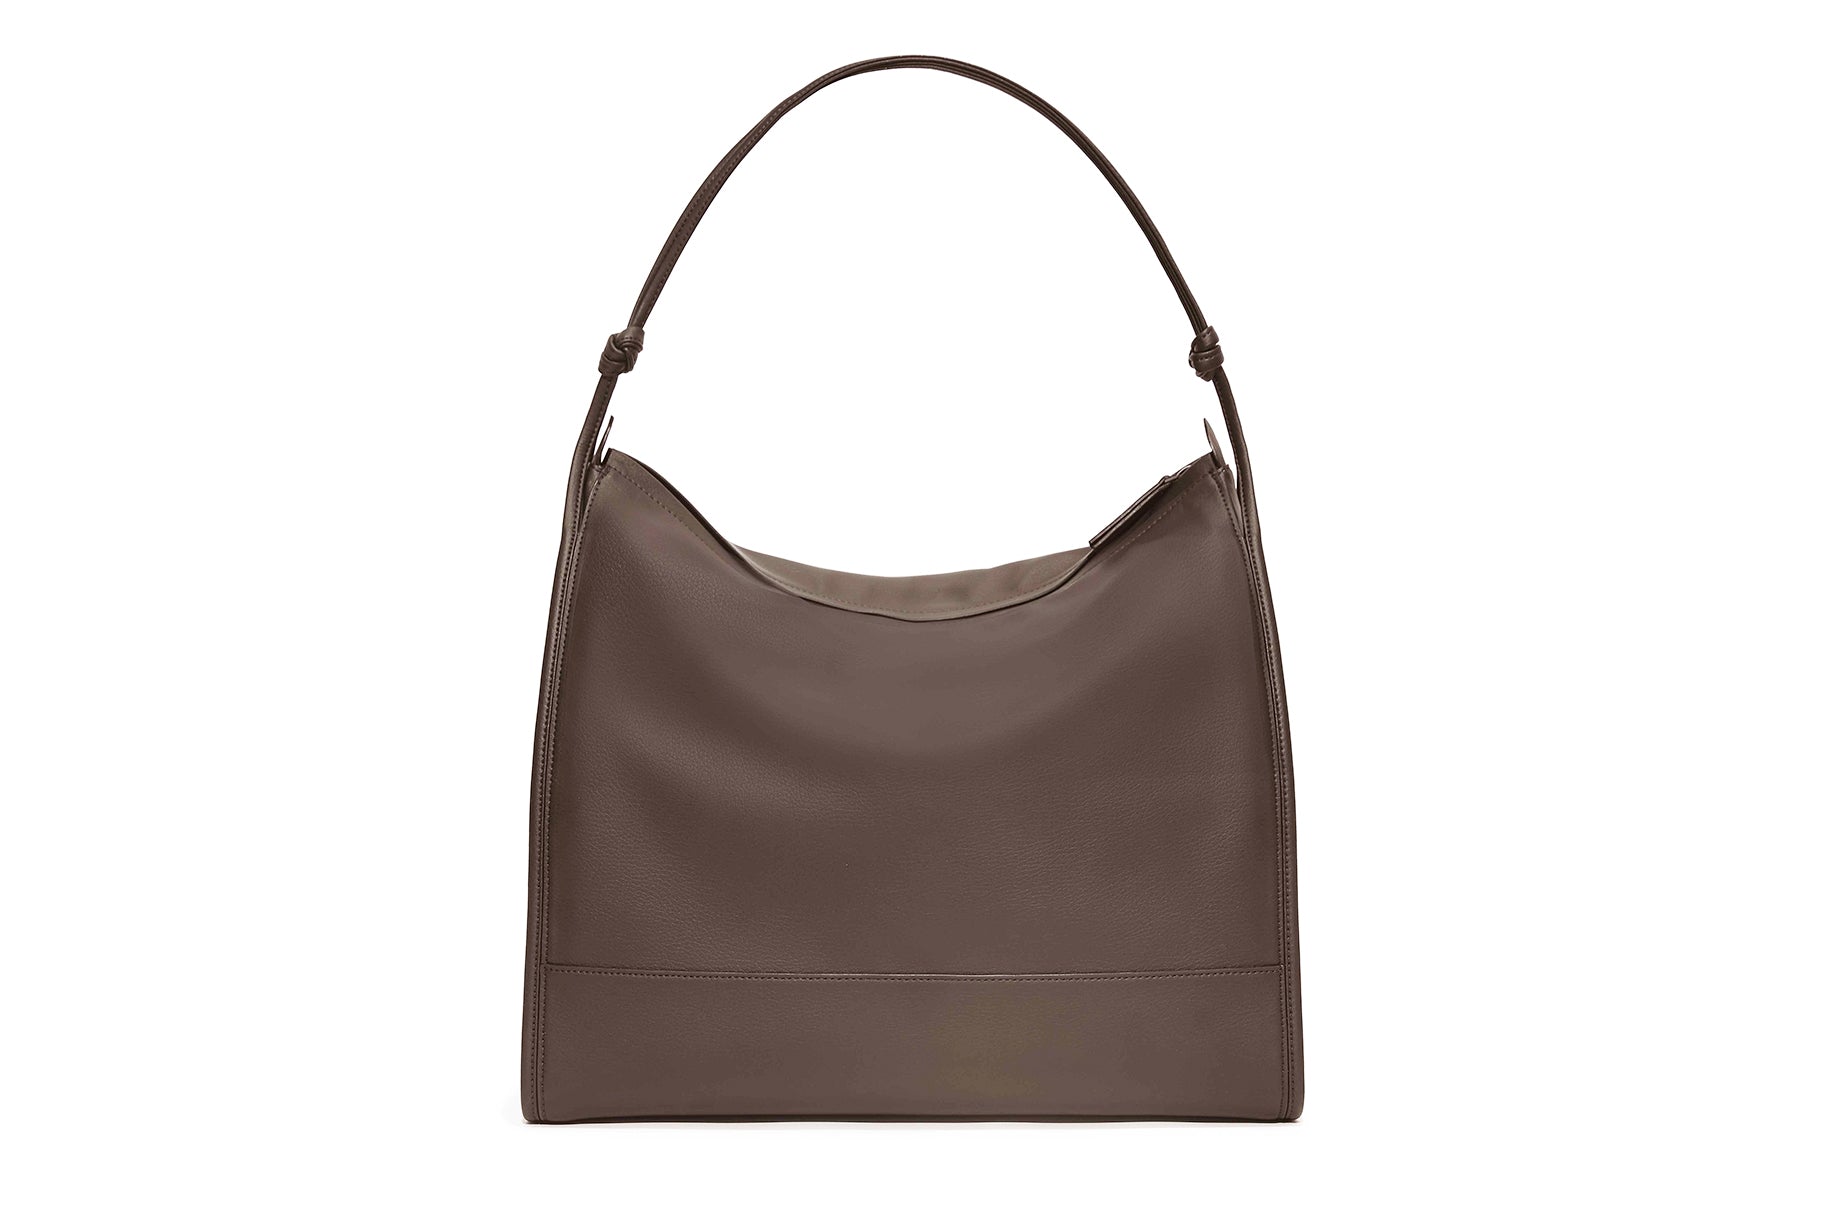 The Shoulder Bag in Banbū Leather in Taupe image 3